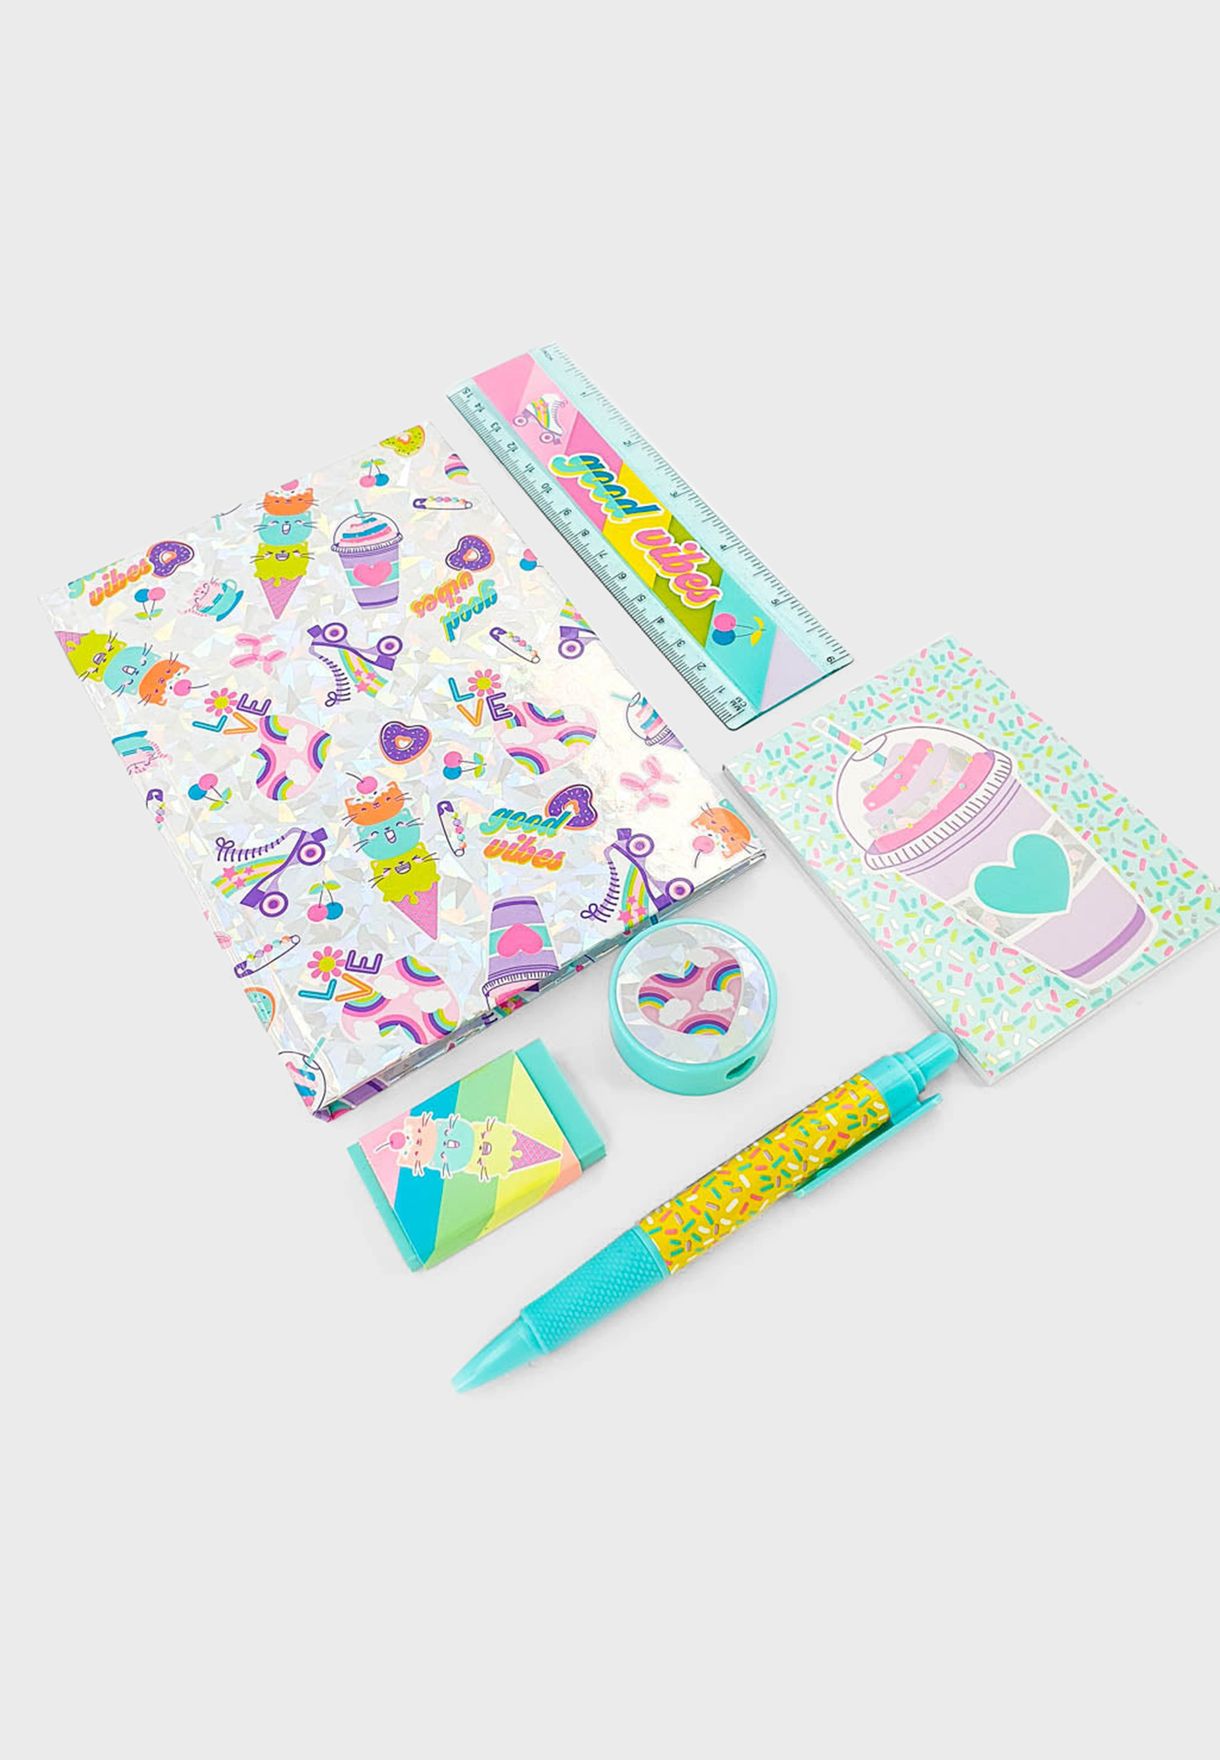 Holographic Multicolored Stationery Set